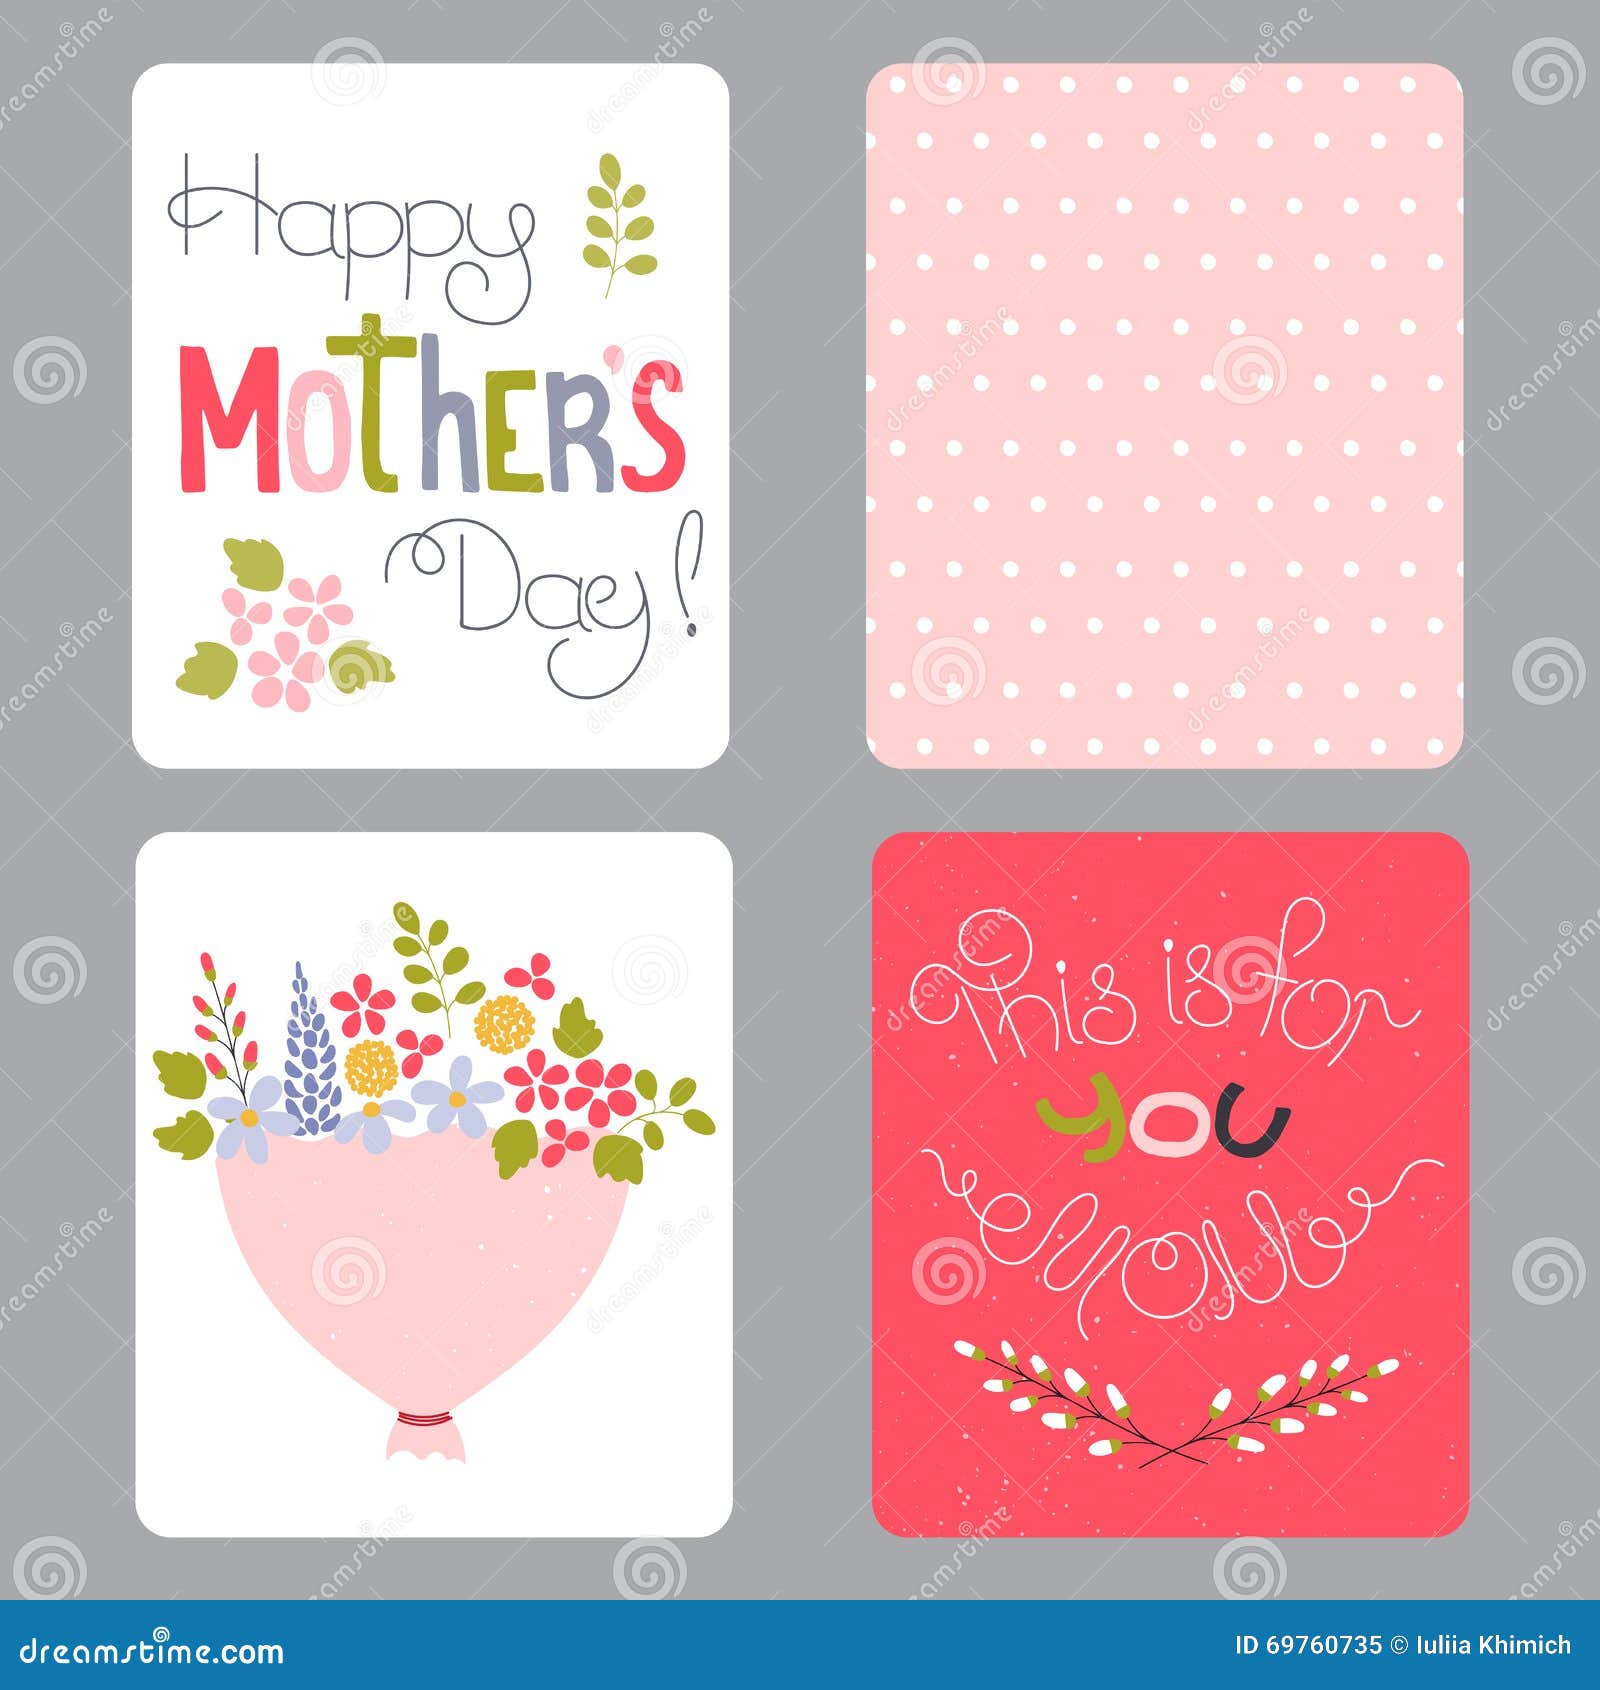 Mothers Day set of cards stock vector. Illustration of placard For Mothers Day Card Templates